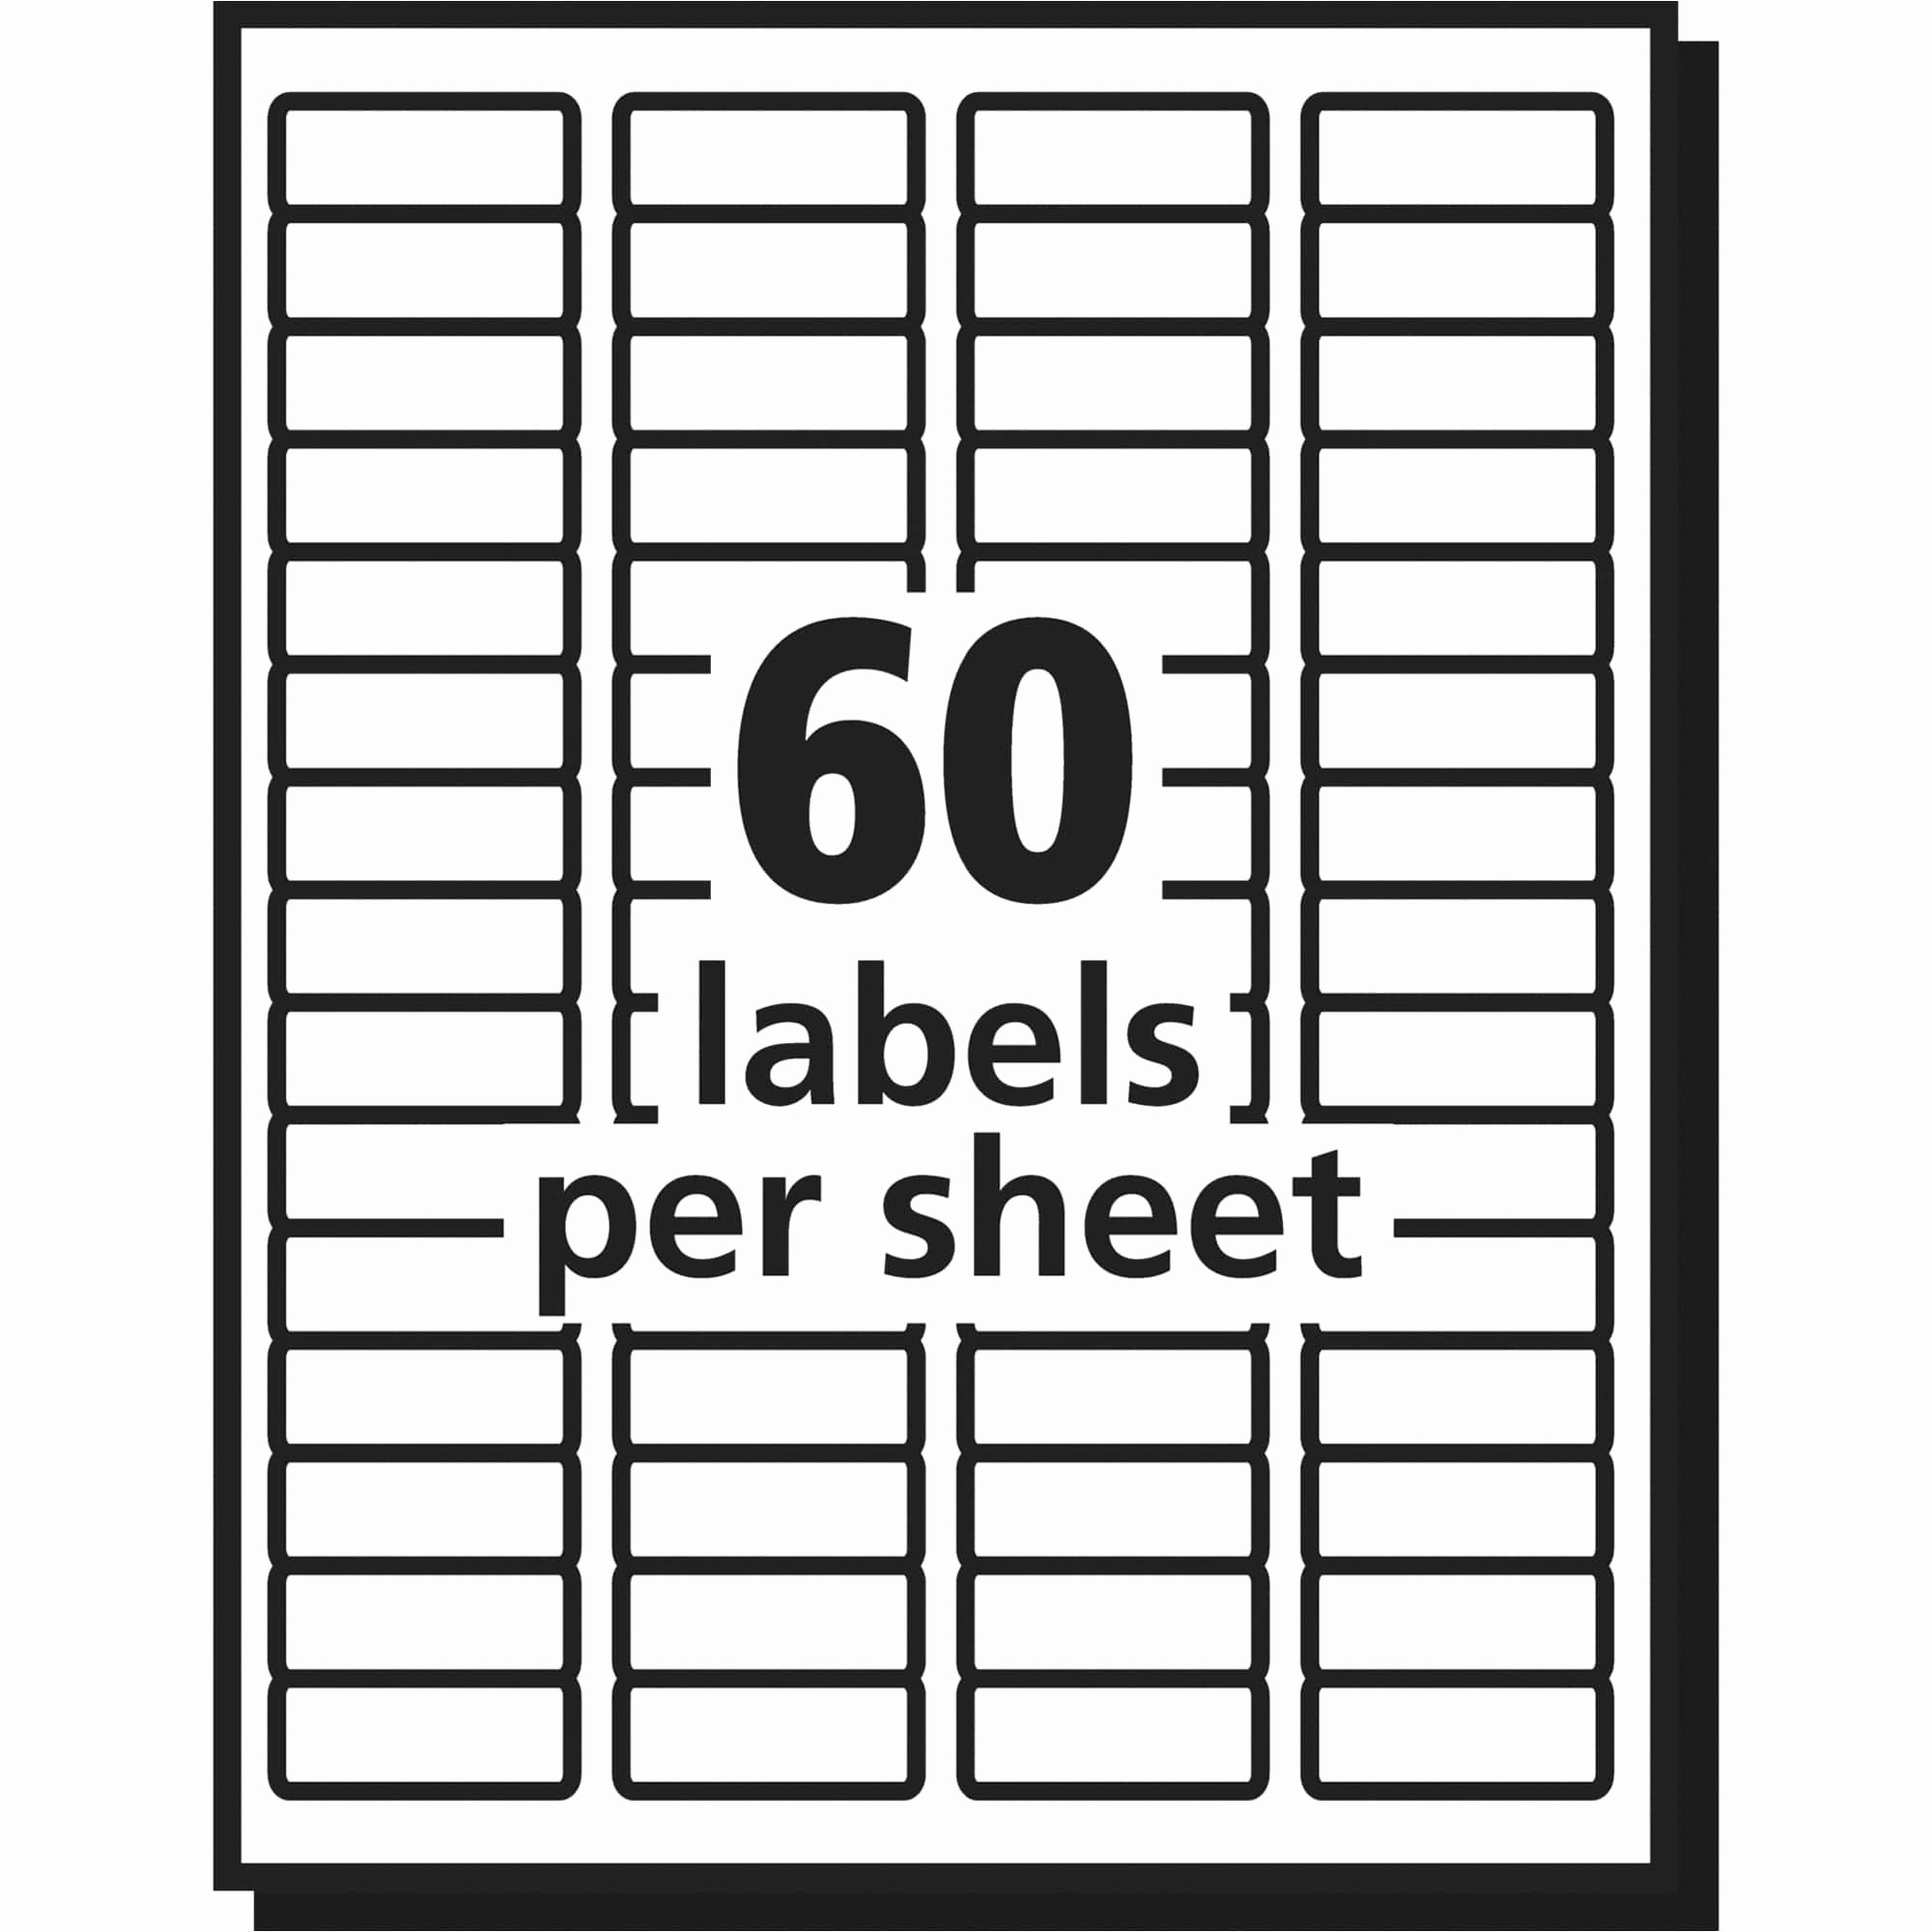 Avery Label 30 Per Sheet New Avery 30 Labels Per Sheet Template